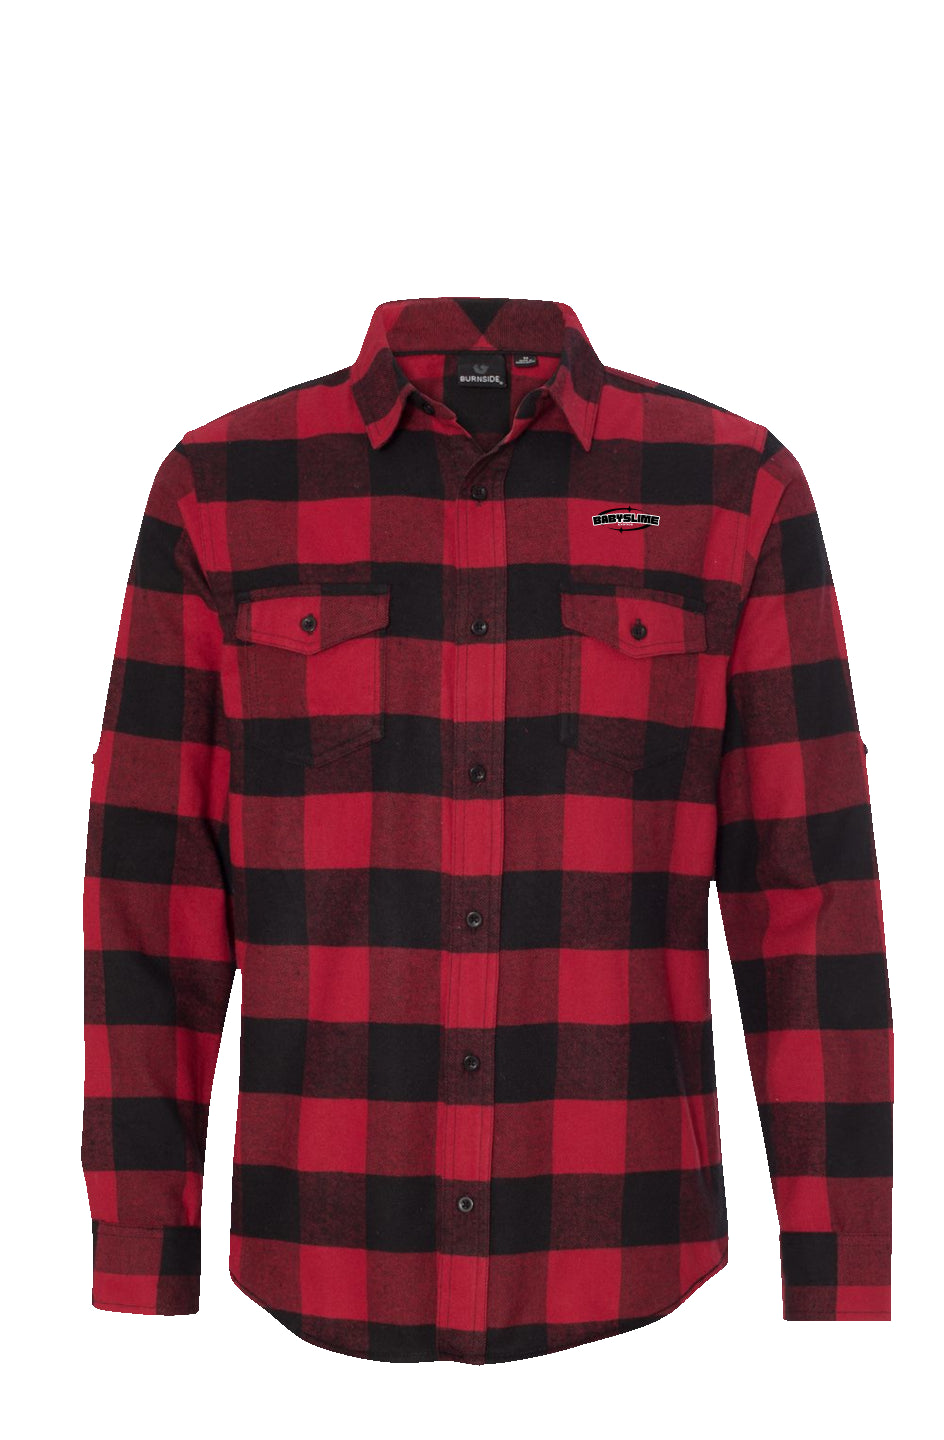 Babyslimeexotics Red And Black Flannel